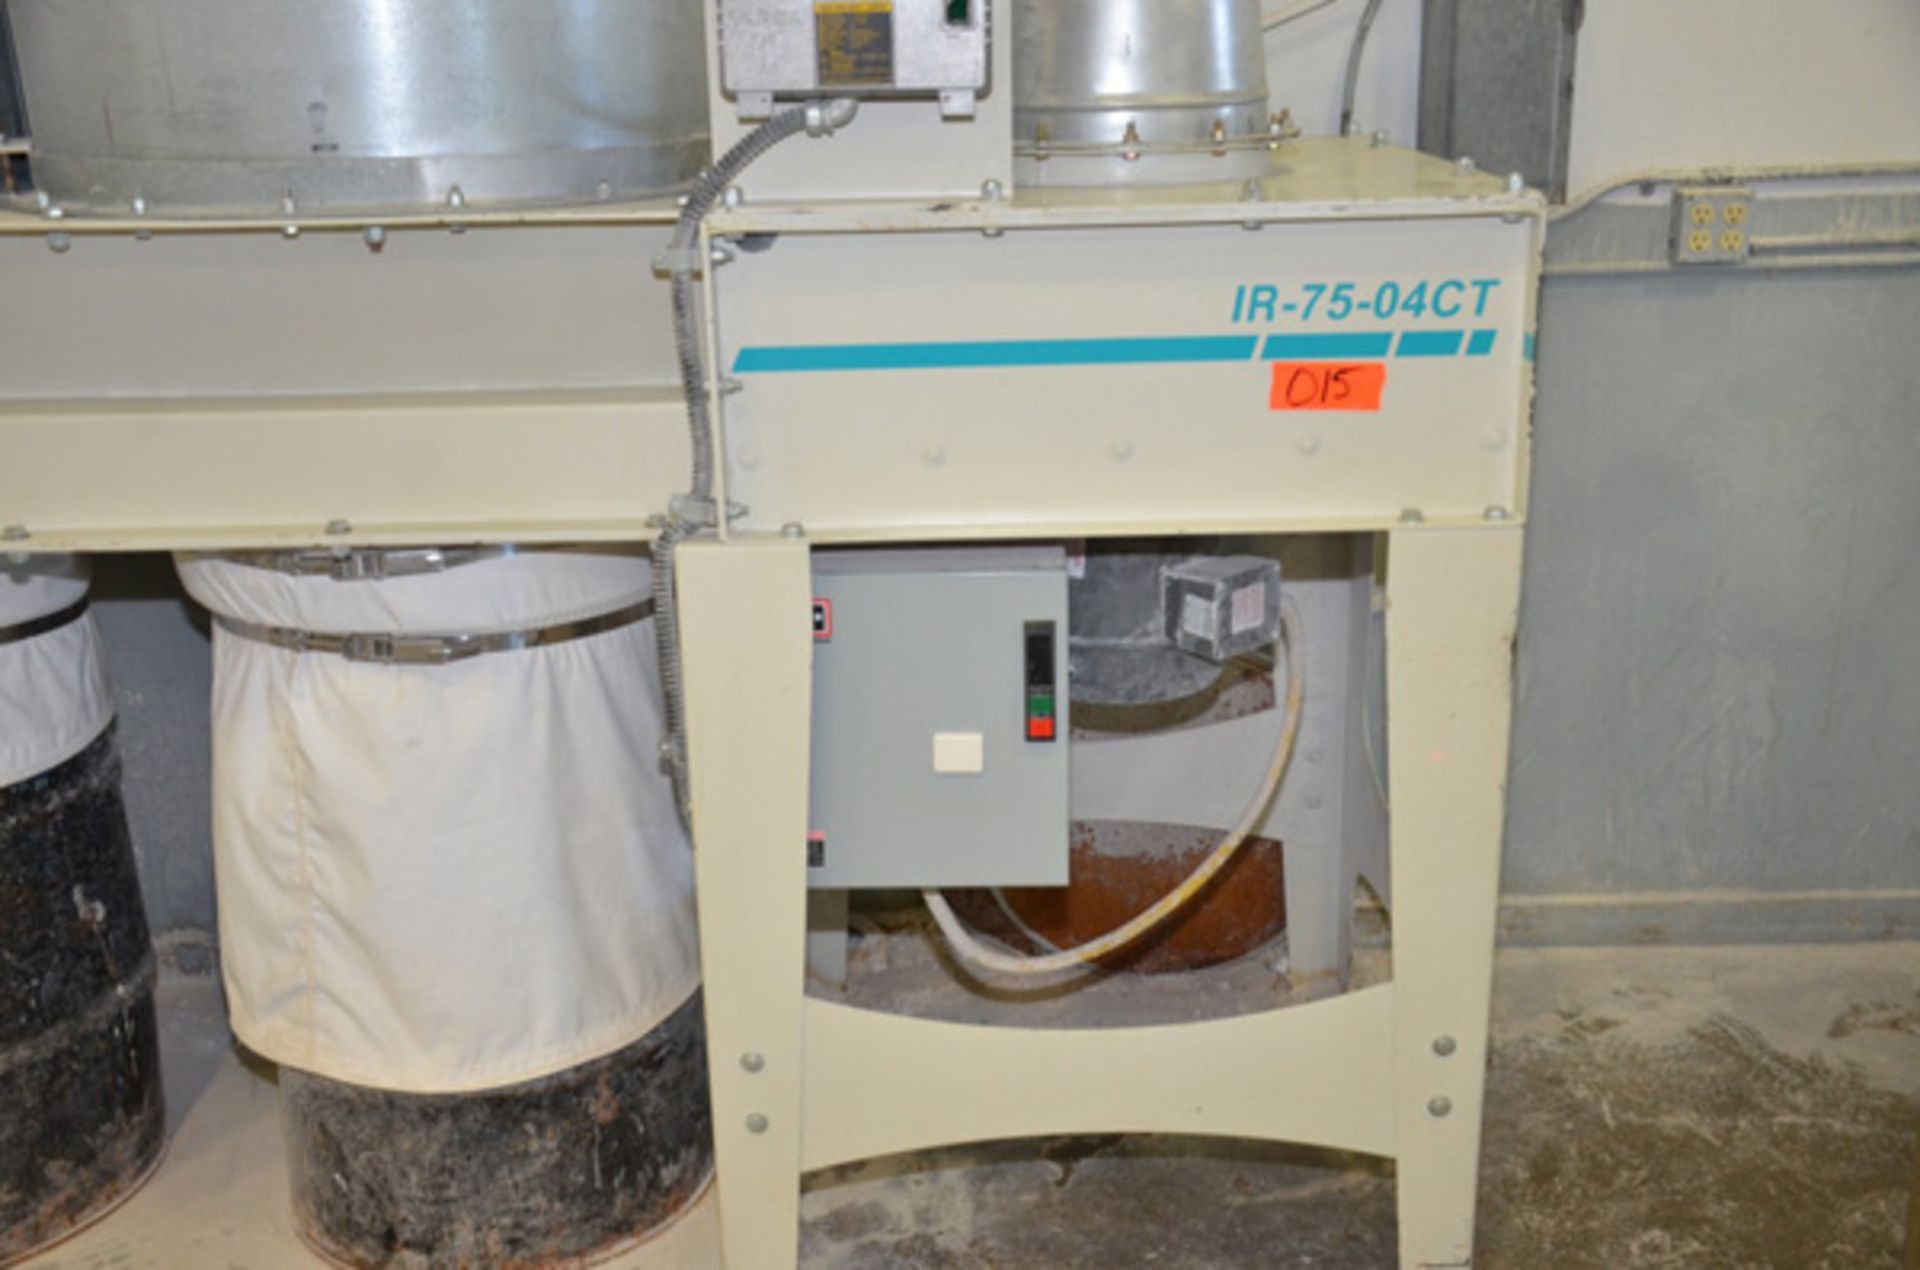 Wise, Mdl: IR-75-046T Dust Collector w/ pulse shaker - 7-1/2 HP, DV Voltage, 3 Phase - Image 9 of 11